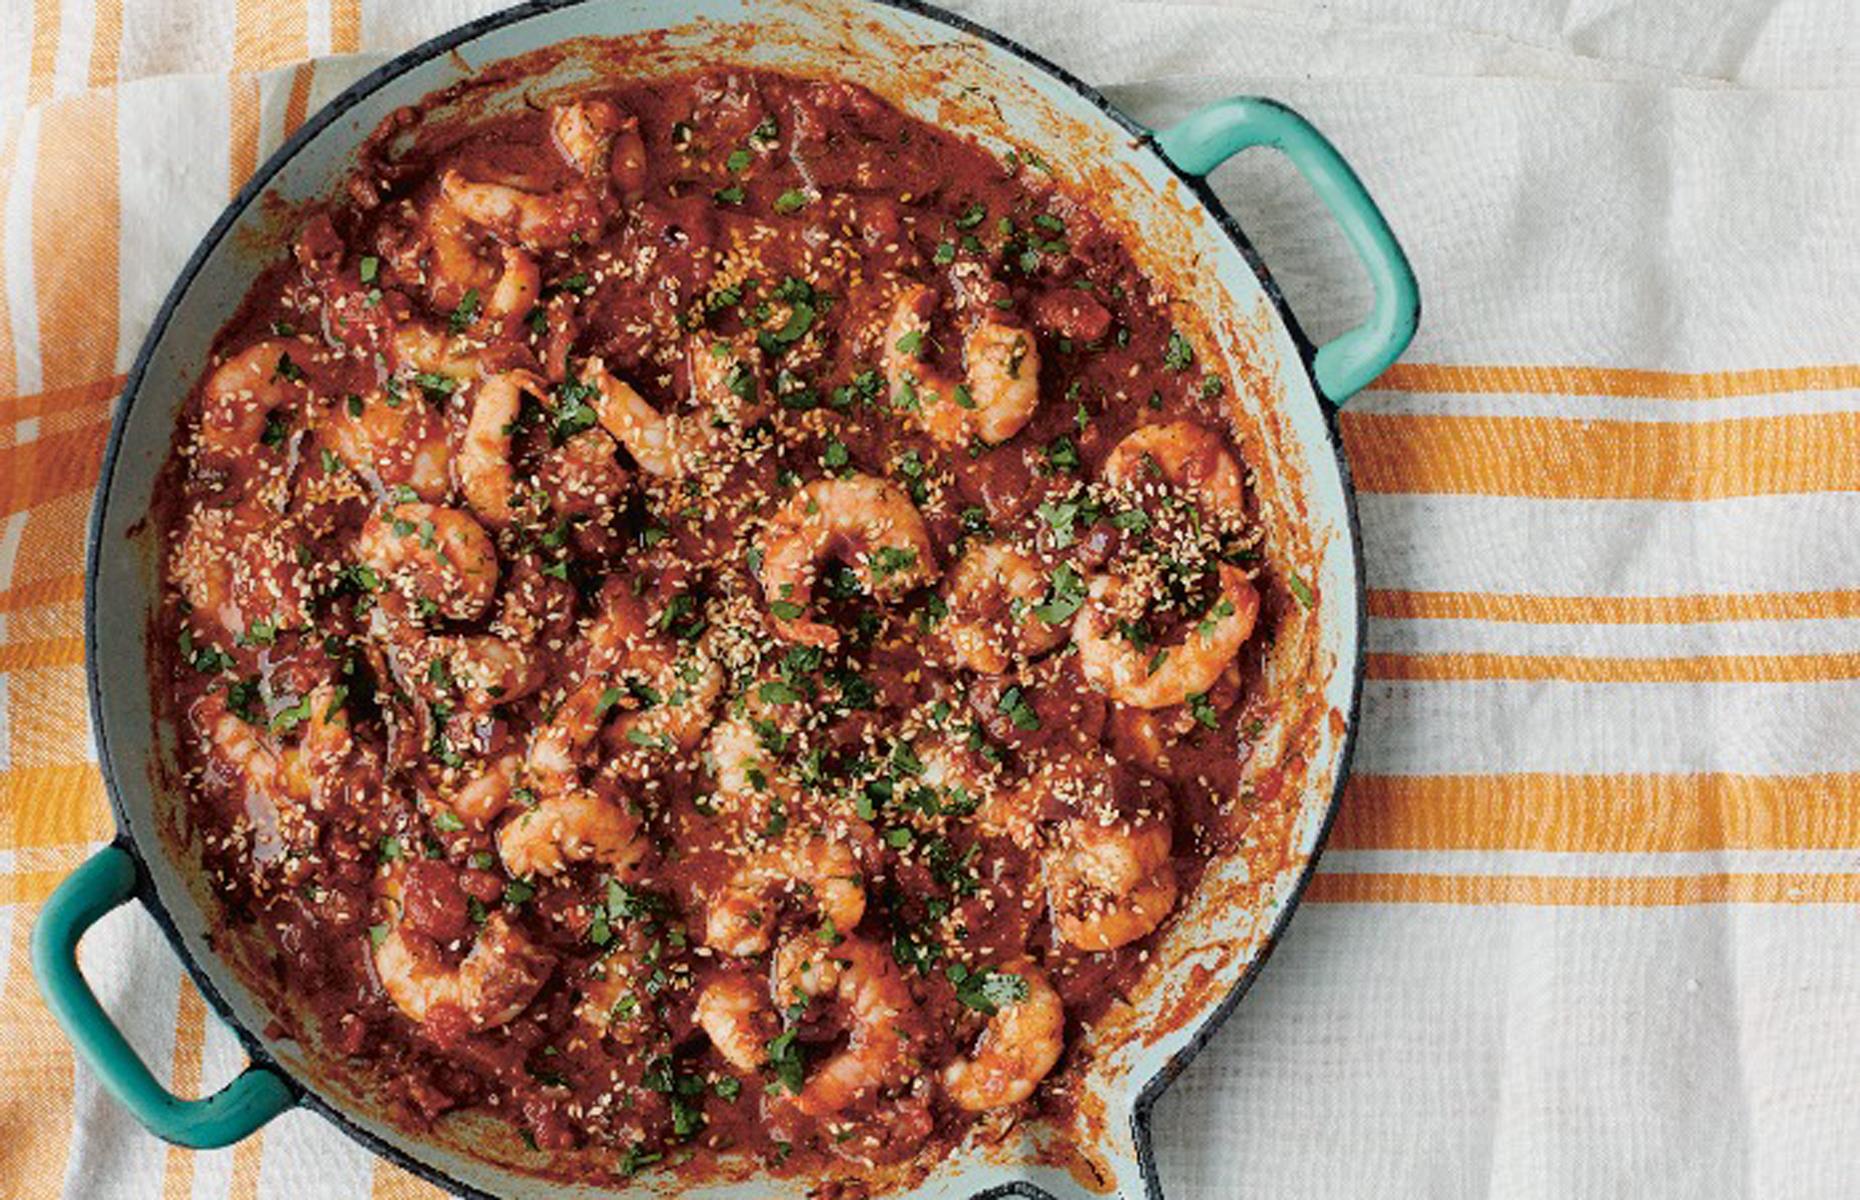 <p>Middle Eastern dishes are rarely too fiery, where chilies are blended with aromatic spices, garlic and herbs. In our warming, Palestinian spicy shrimp and tomato stew, you can adjust the heat to suit your palate. With the balanced sweetness of tomatoes, it's all cooked in one-pan and is ready in under an hour.</p>  <p><strong><a href="https://www.lovefood.com/recipes/75899/spicy-prawn-and-tomato-stew-recipe">Get the recipe for spicy shrimp and tomato stew here</a></strong></p>